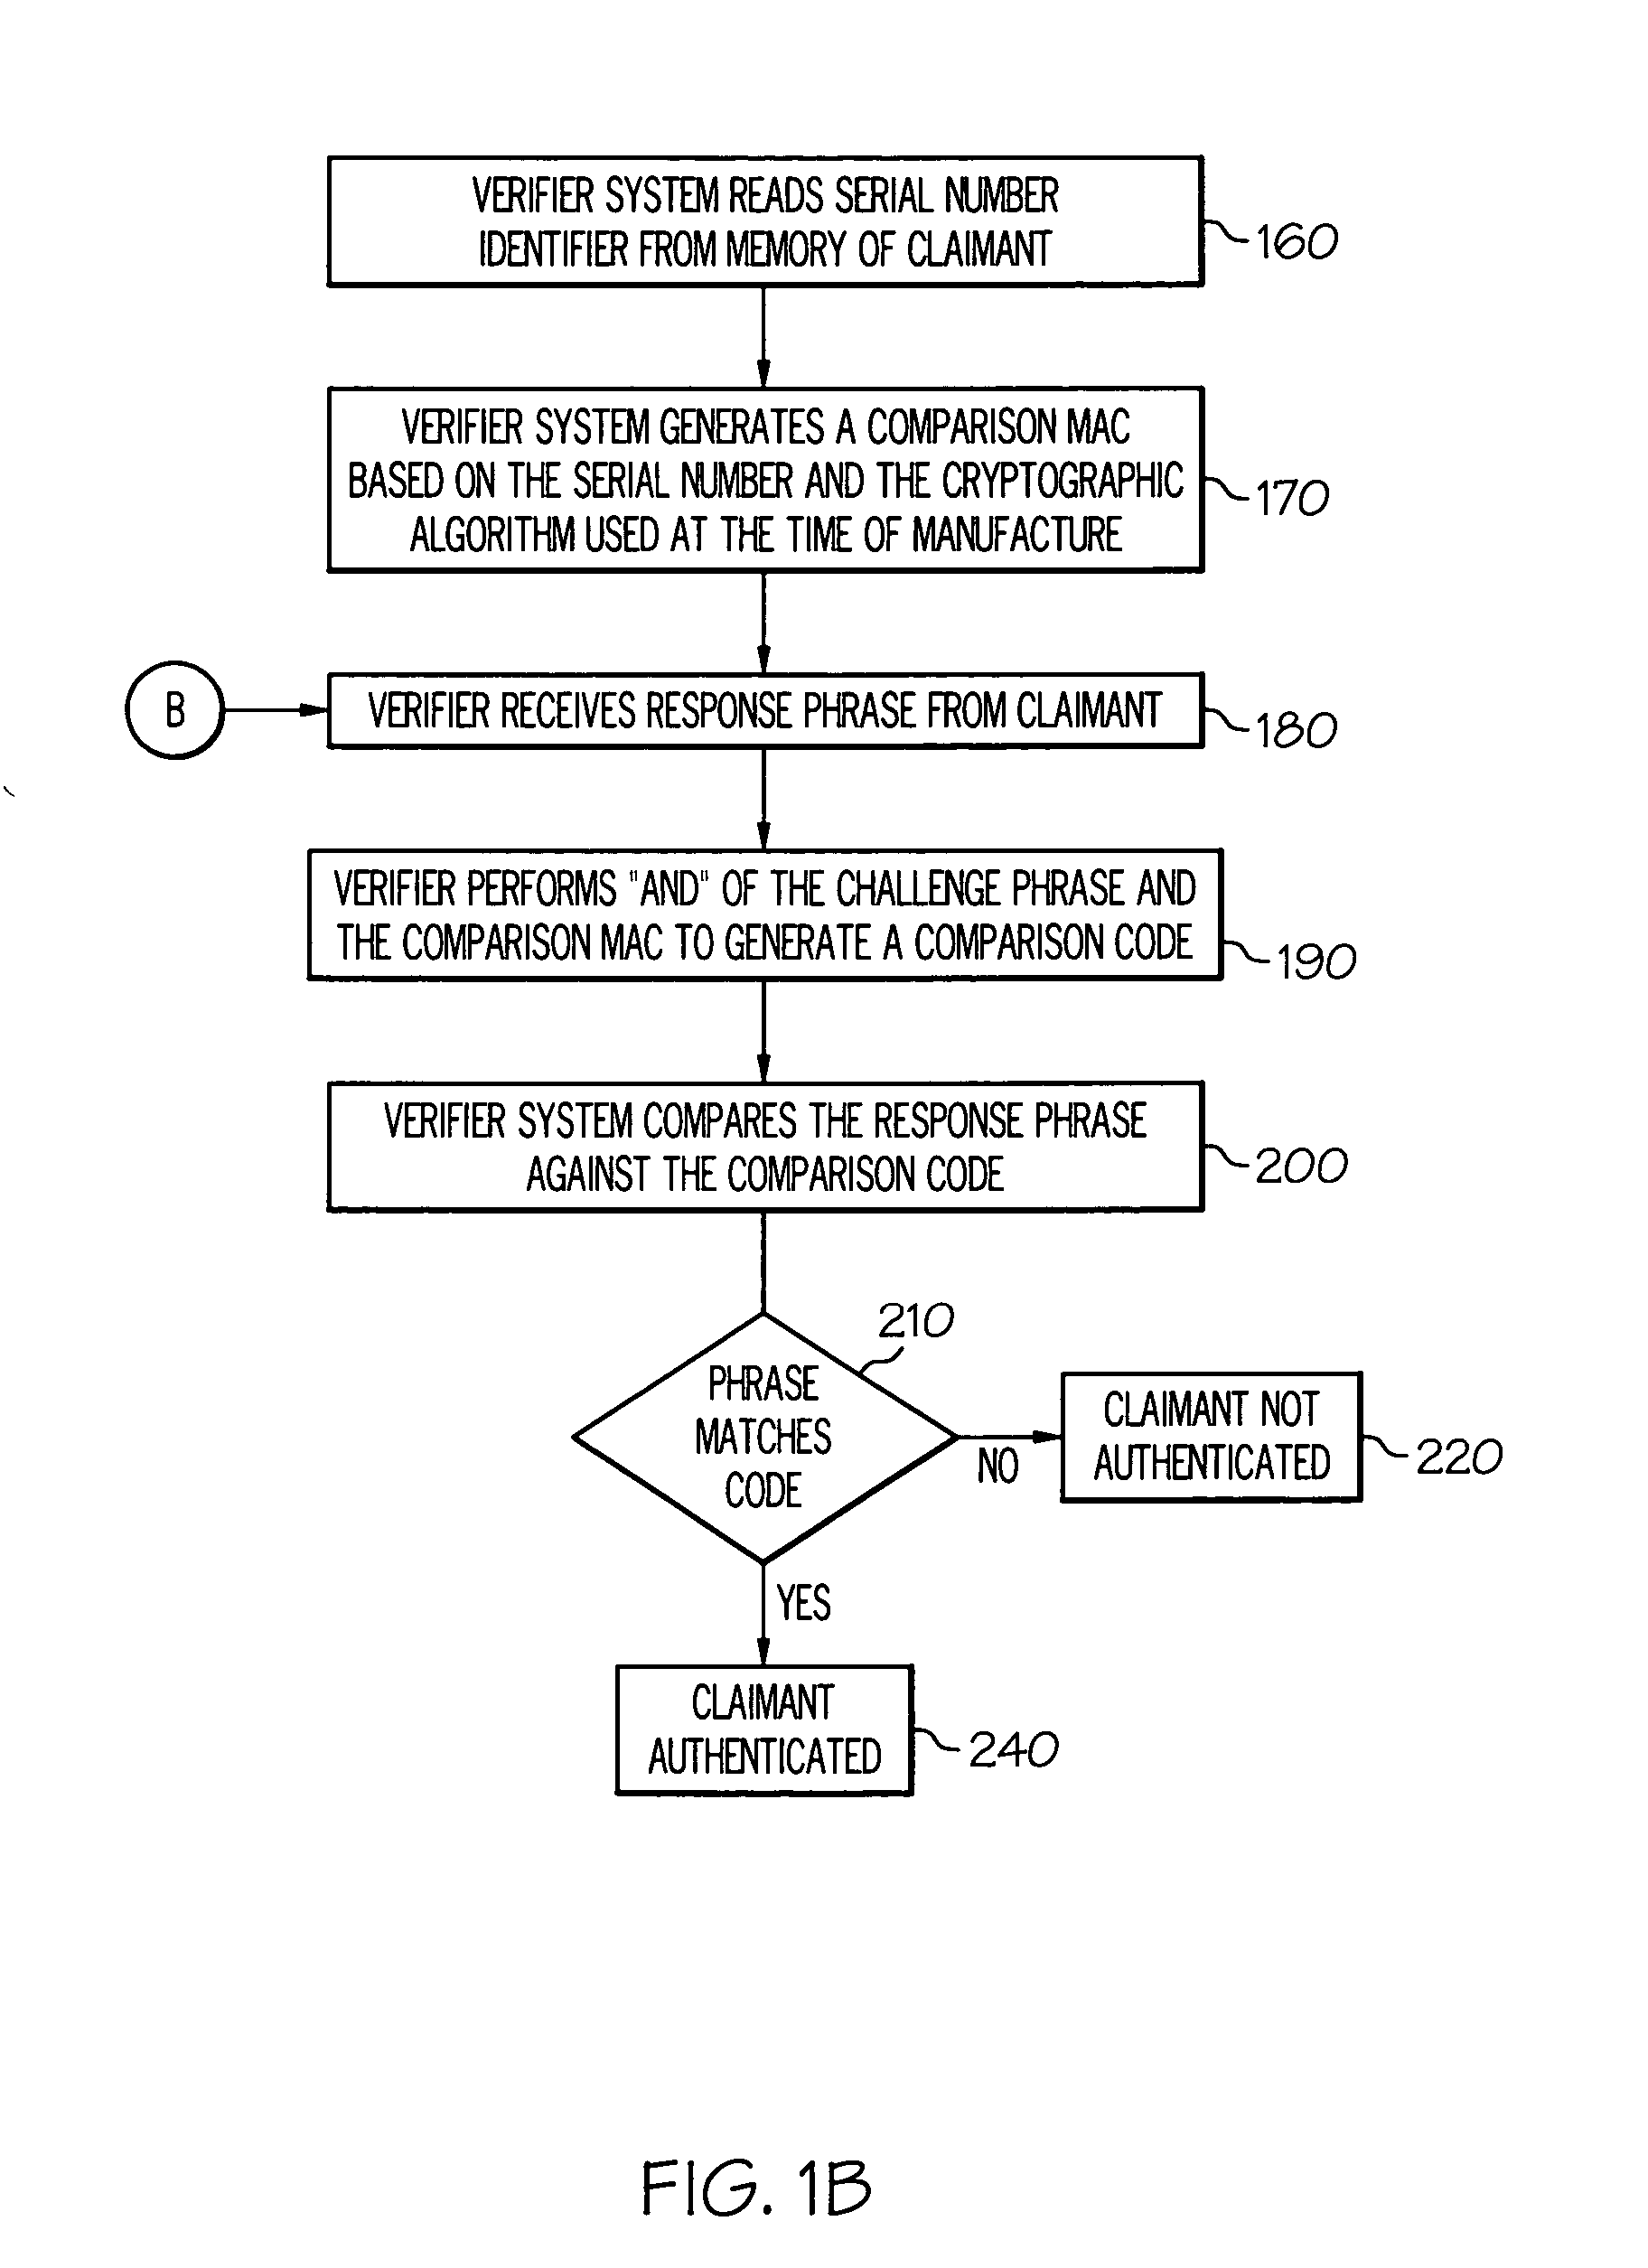 Methods for authenticating an identity of an article in electrical communication with a verifier system